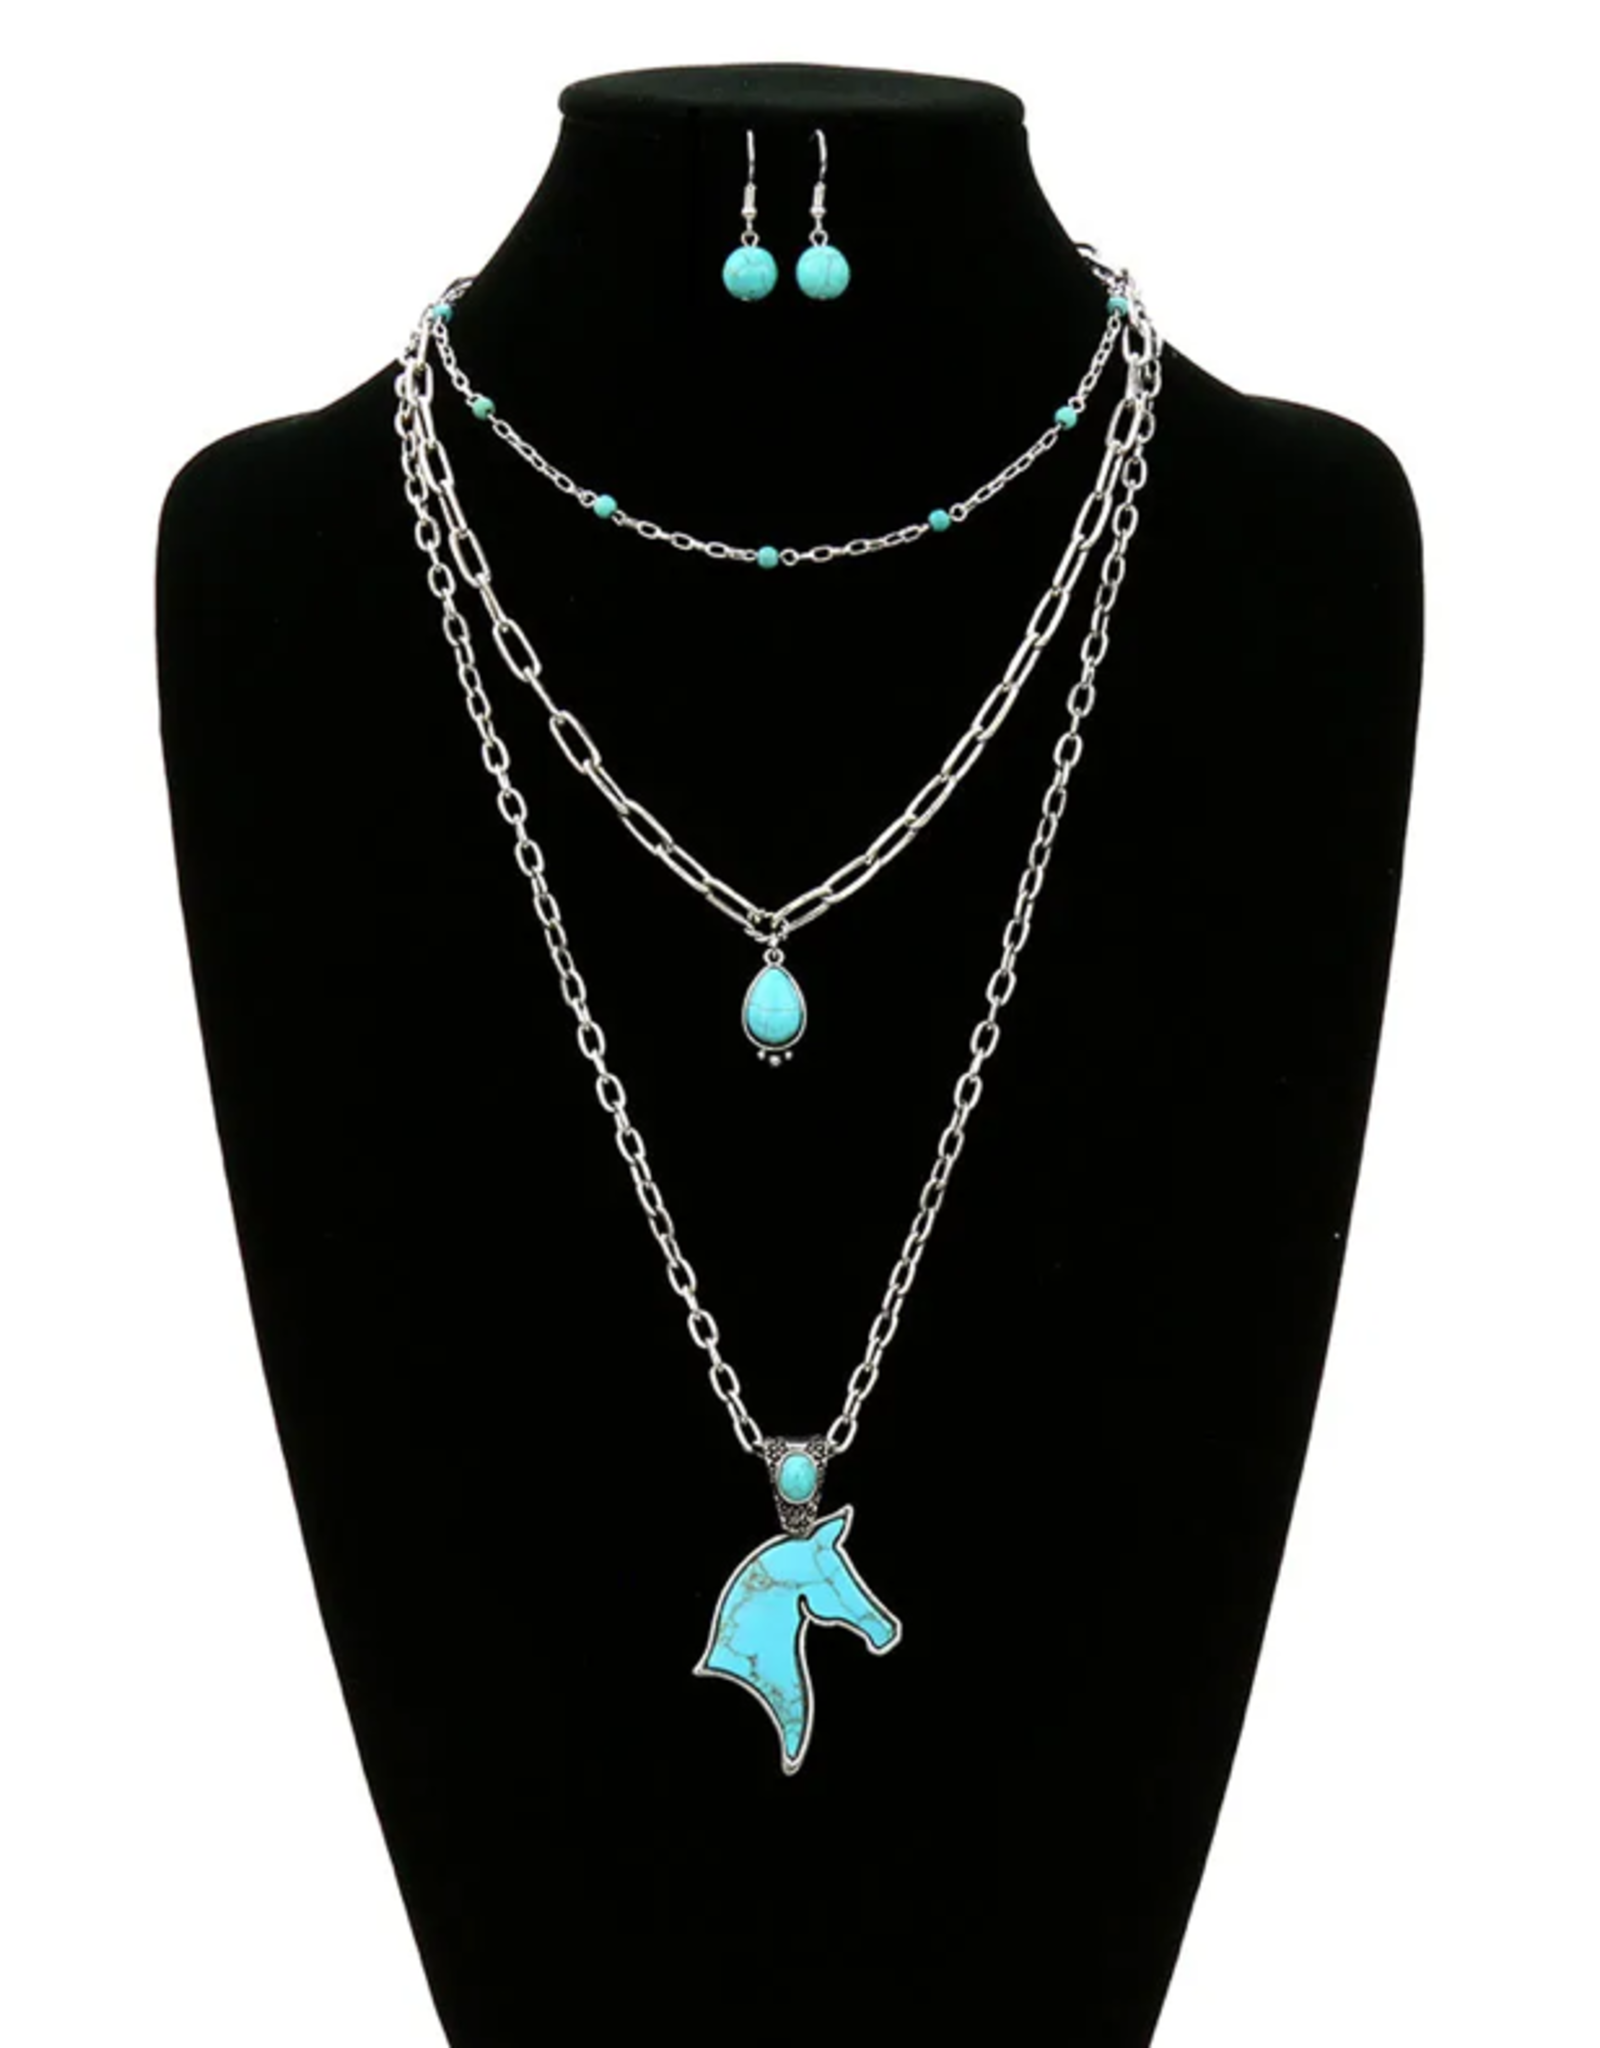 NECKLACE SET WESTERN HORSE STONE LAYERED W/EARRINGS